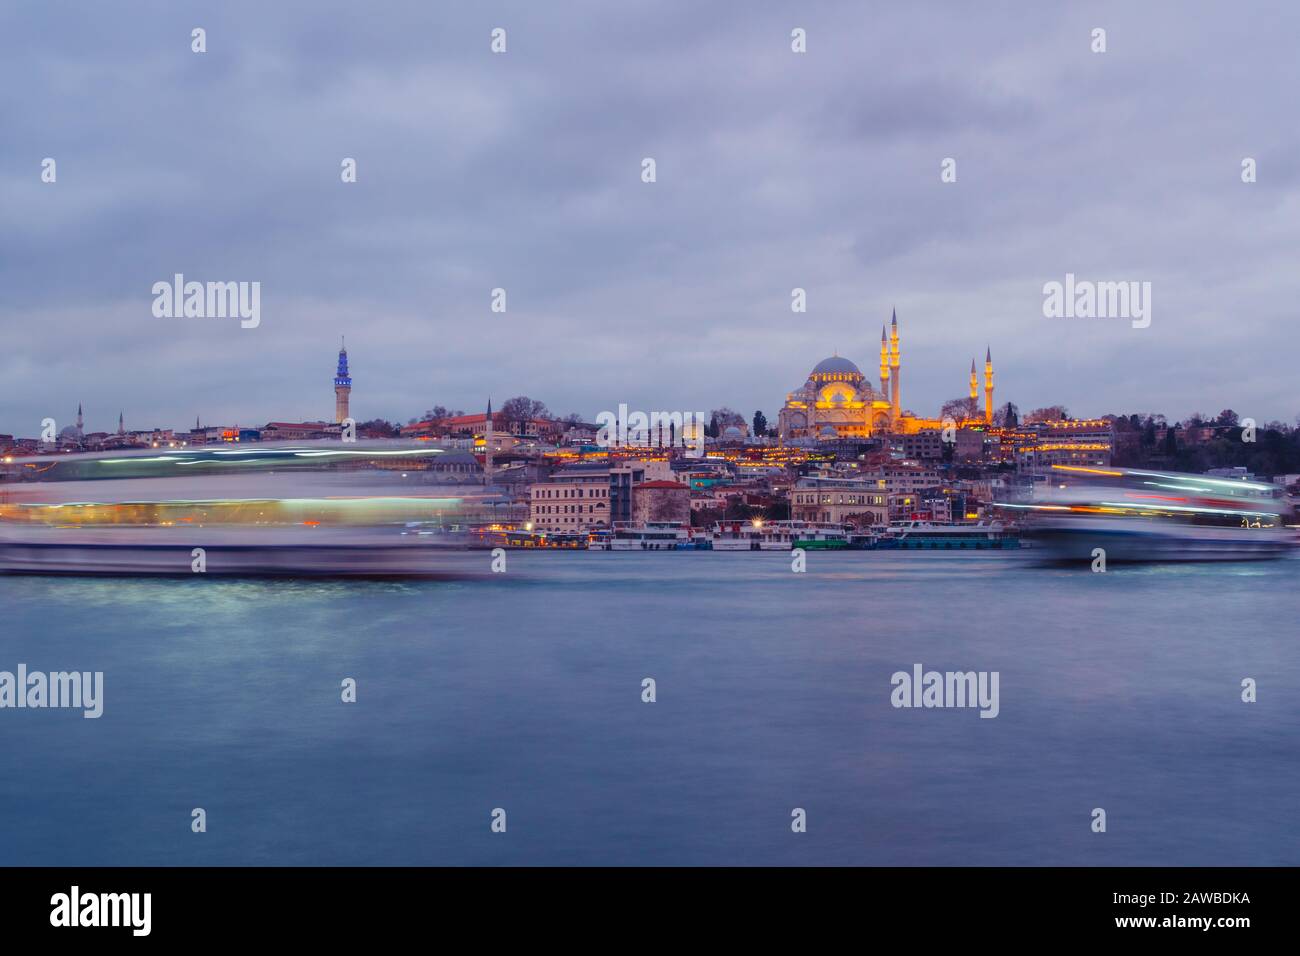 Istanbul, Turkey - Jan 16, 2020: Suleymaniye mosque and passengers Ferry at the Golden Horn, Istanbul, Turkey. Stock Photo